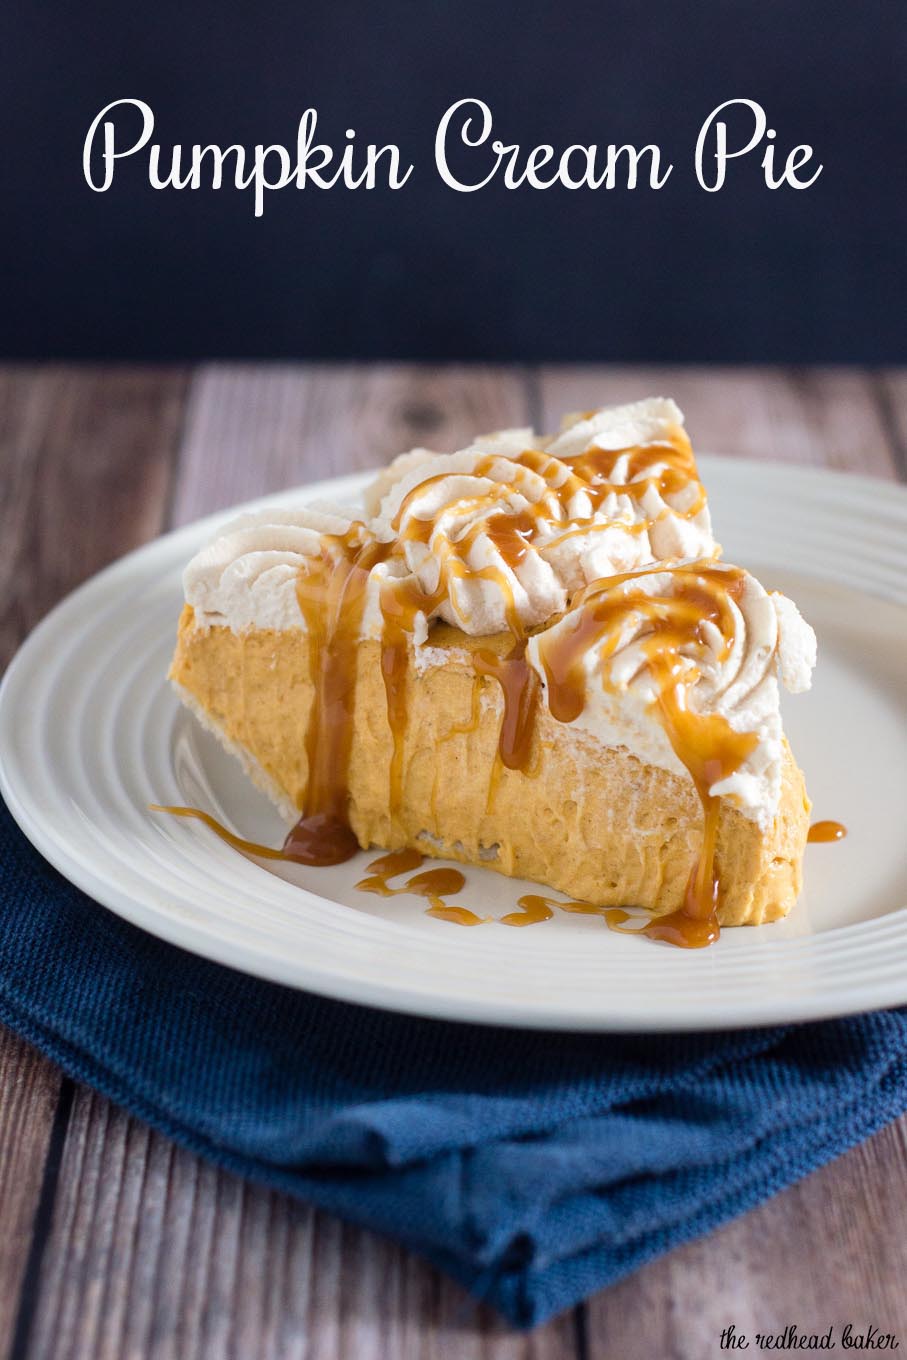 Pumpkin cream pie has all the flavor of classic pumpkin pie with a slightly different texture. It's topped with decadent salted caramel whipped cream.